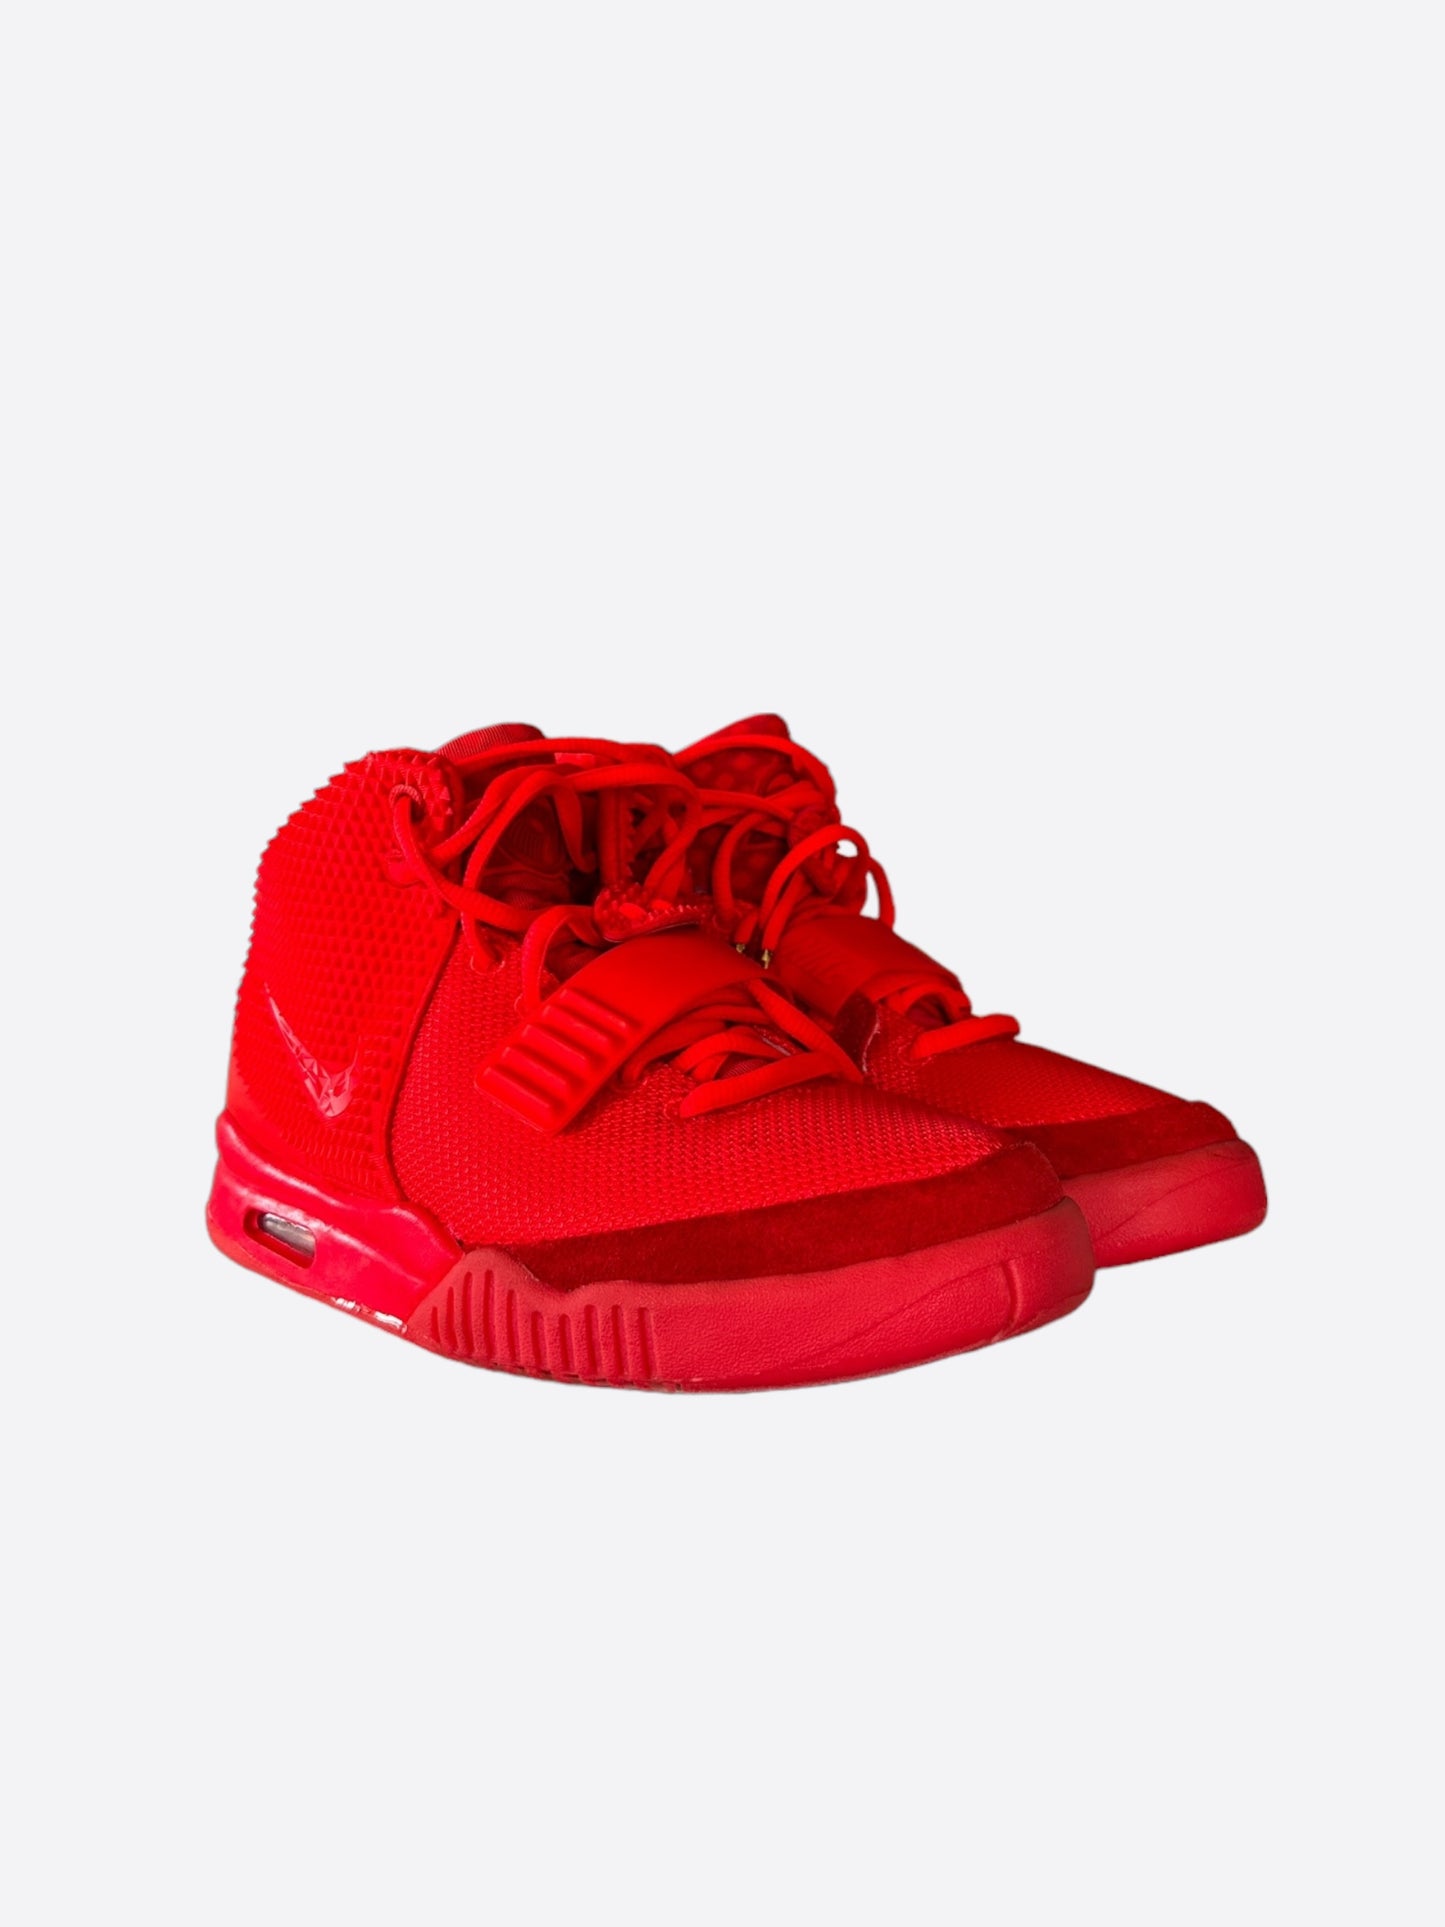 Nike Red October Air Yeezy 2